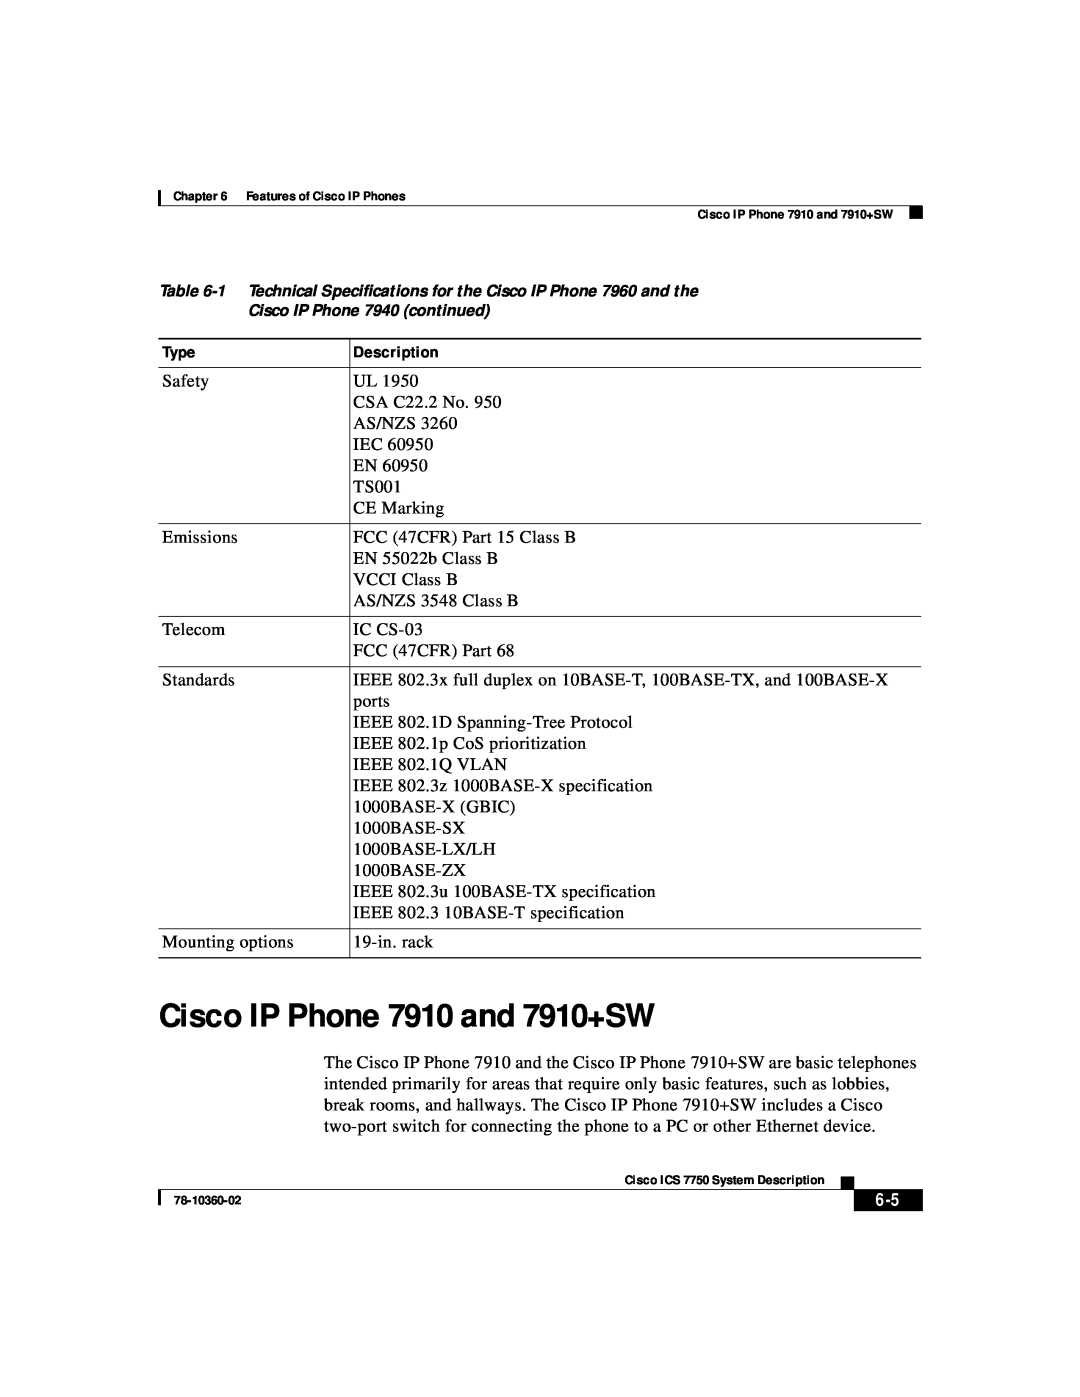 Cisco Systems ICS-7750 manual Features of Cisco IP Phones Cisco IP Phone 7910 and 7910+SW 